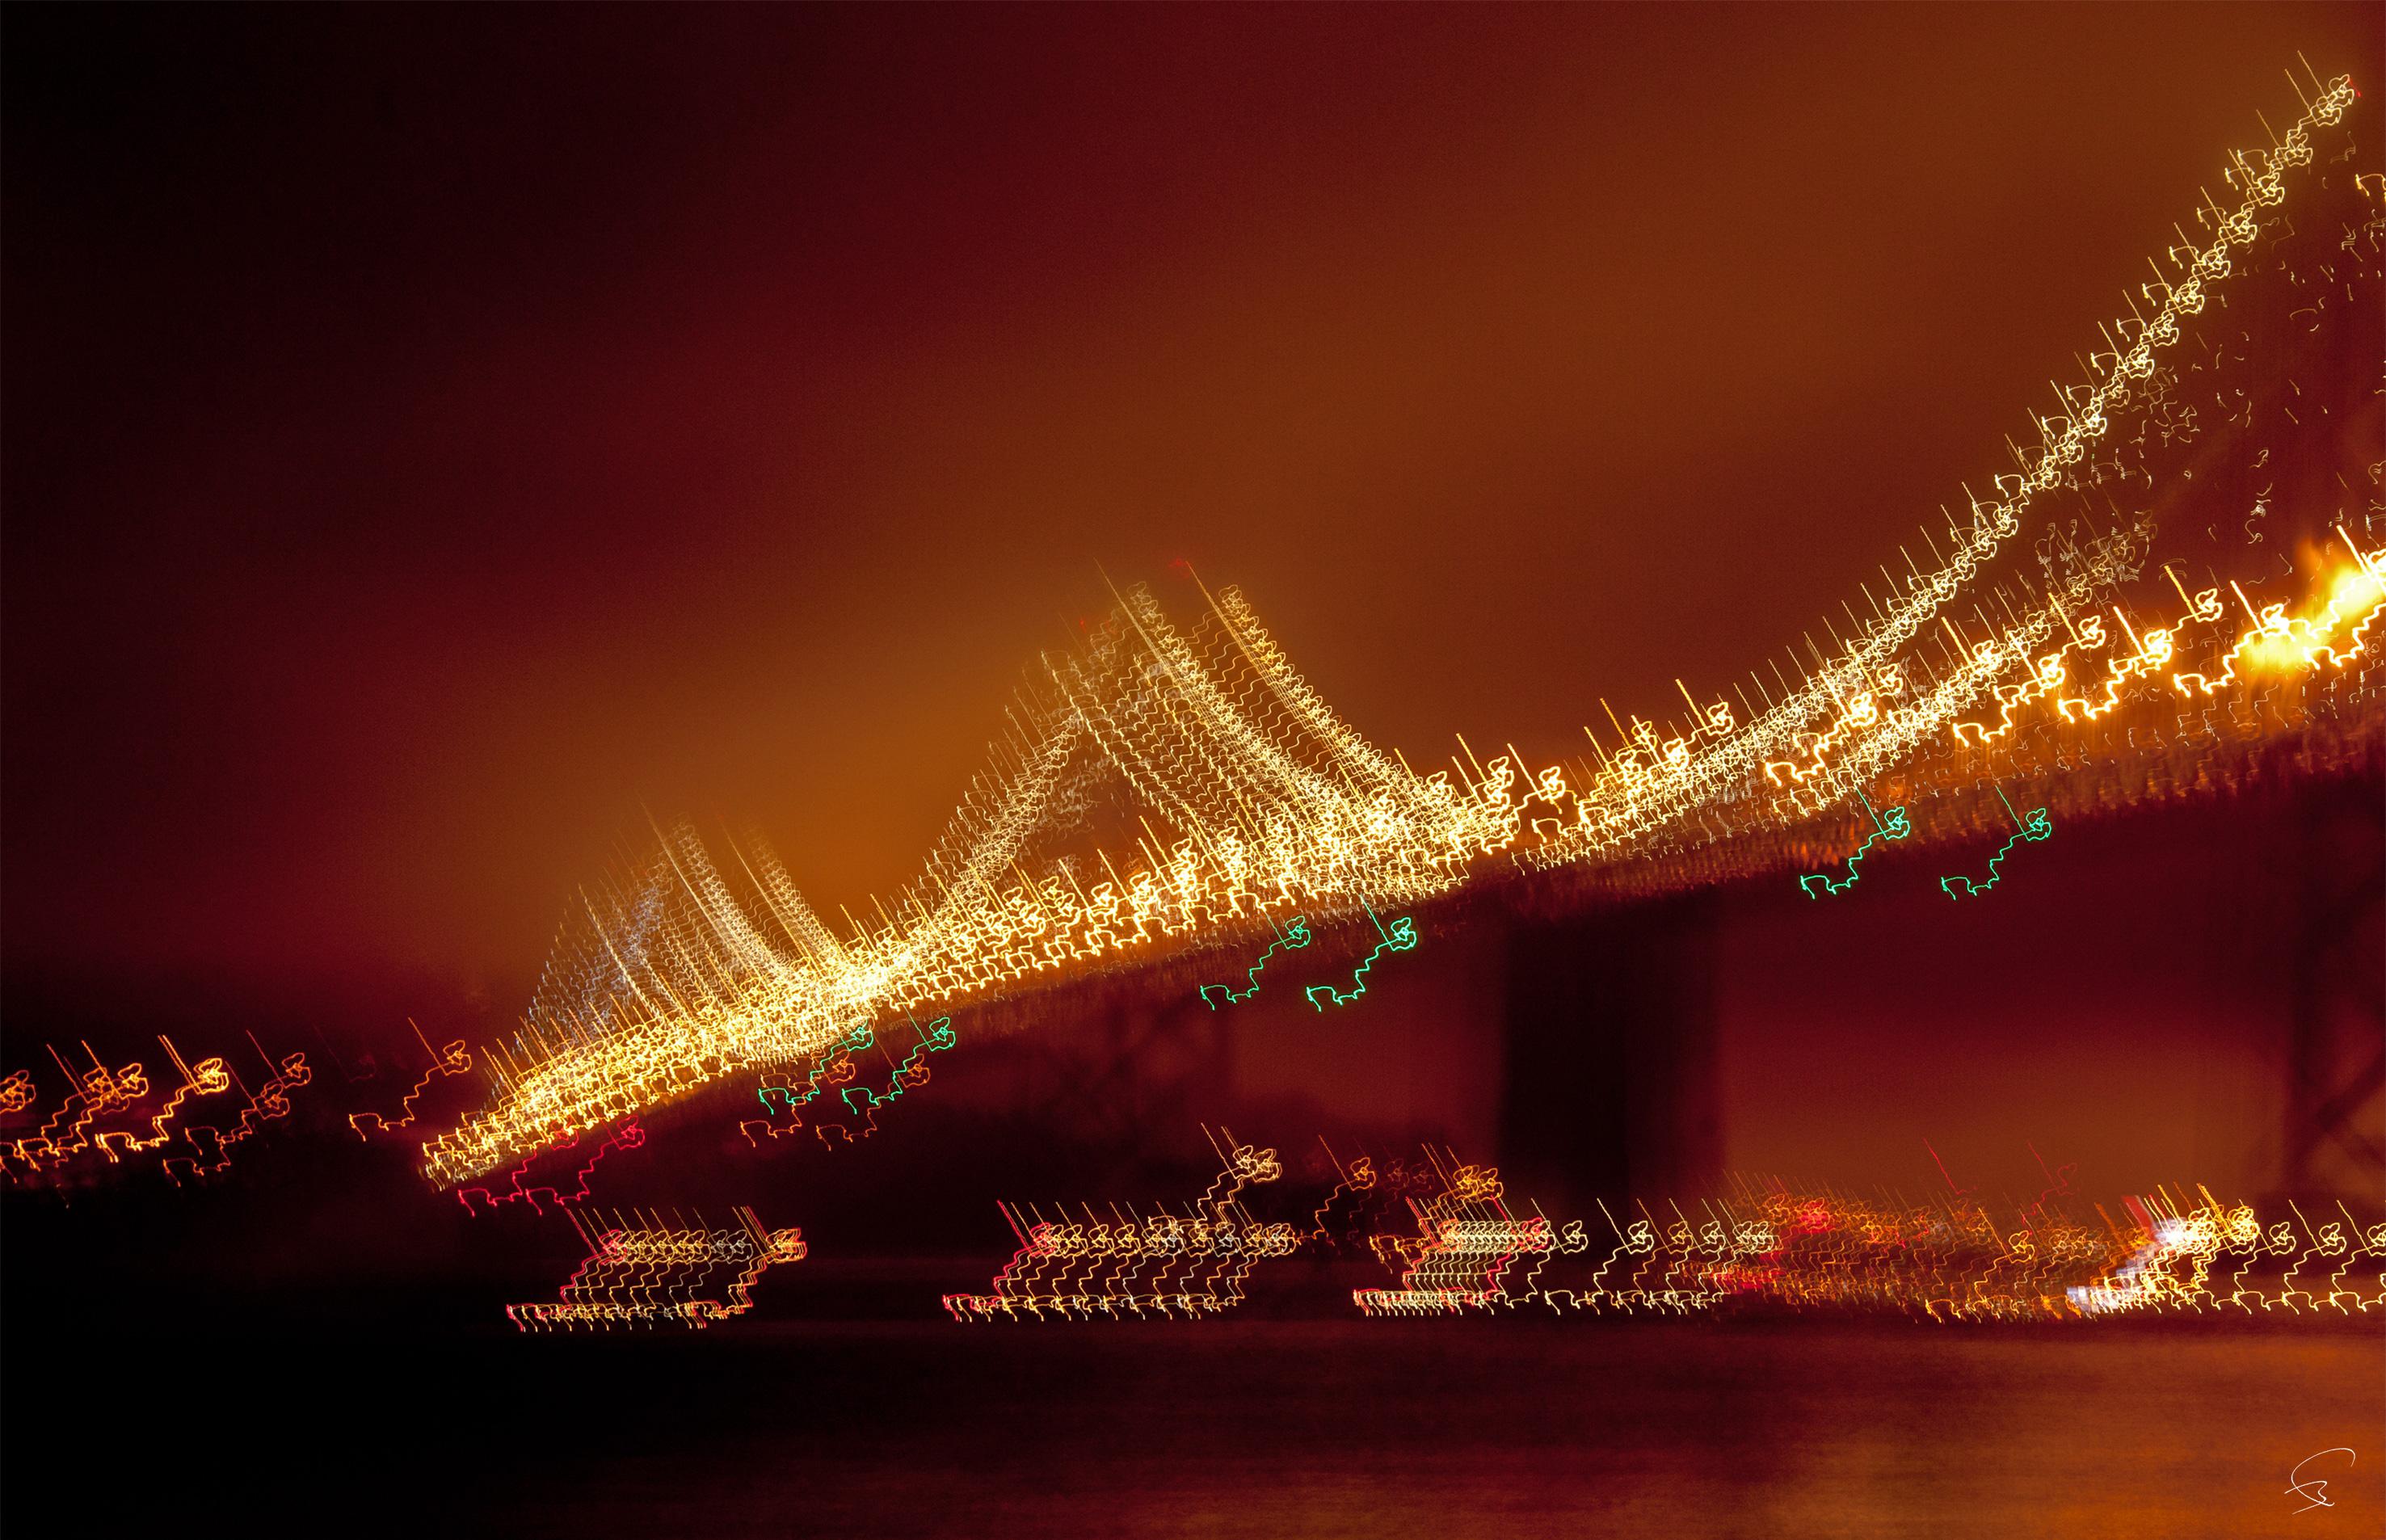 Bruno Paget Abstract Photograph - French Contemporary Photo by B. Paget - San Francisco "Bay Bridge Golfer" 